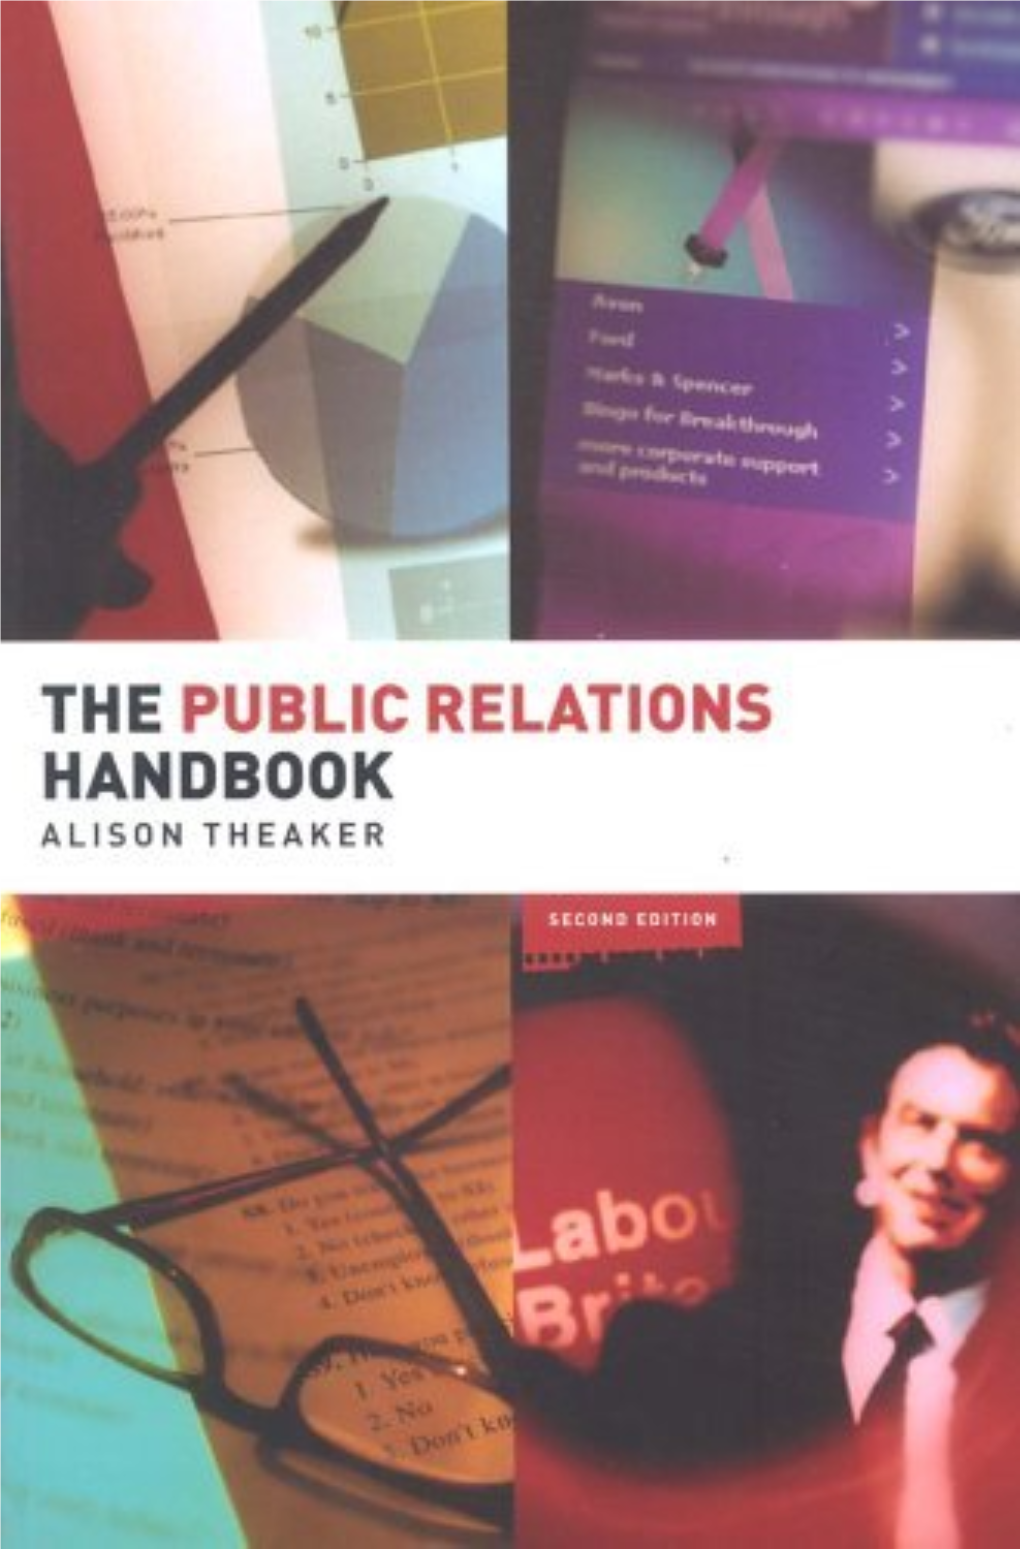 Public Relations Handbook Is a Comprehensive and Detailed Introduction to the 19 Theories and Practices of the Public Relations Industry